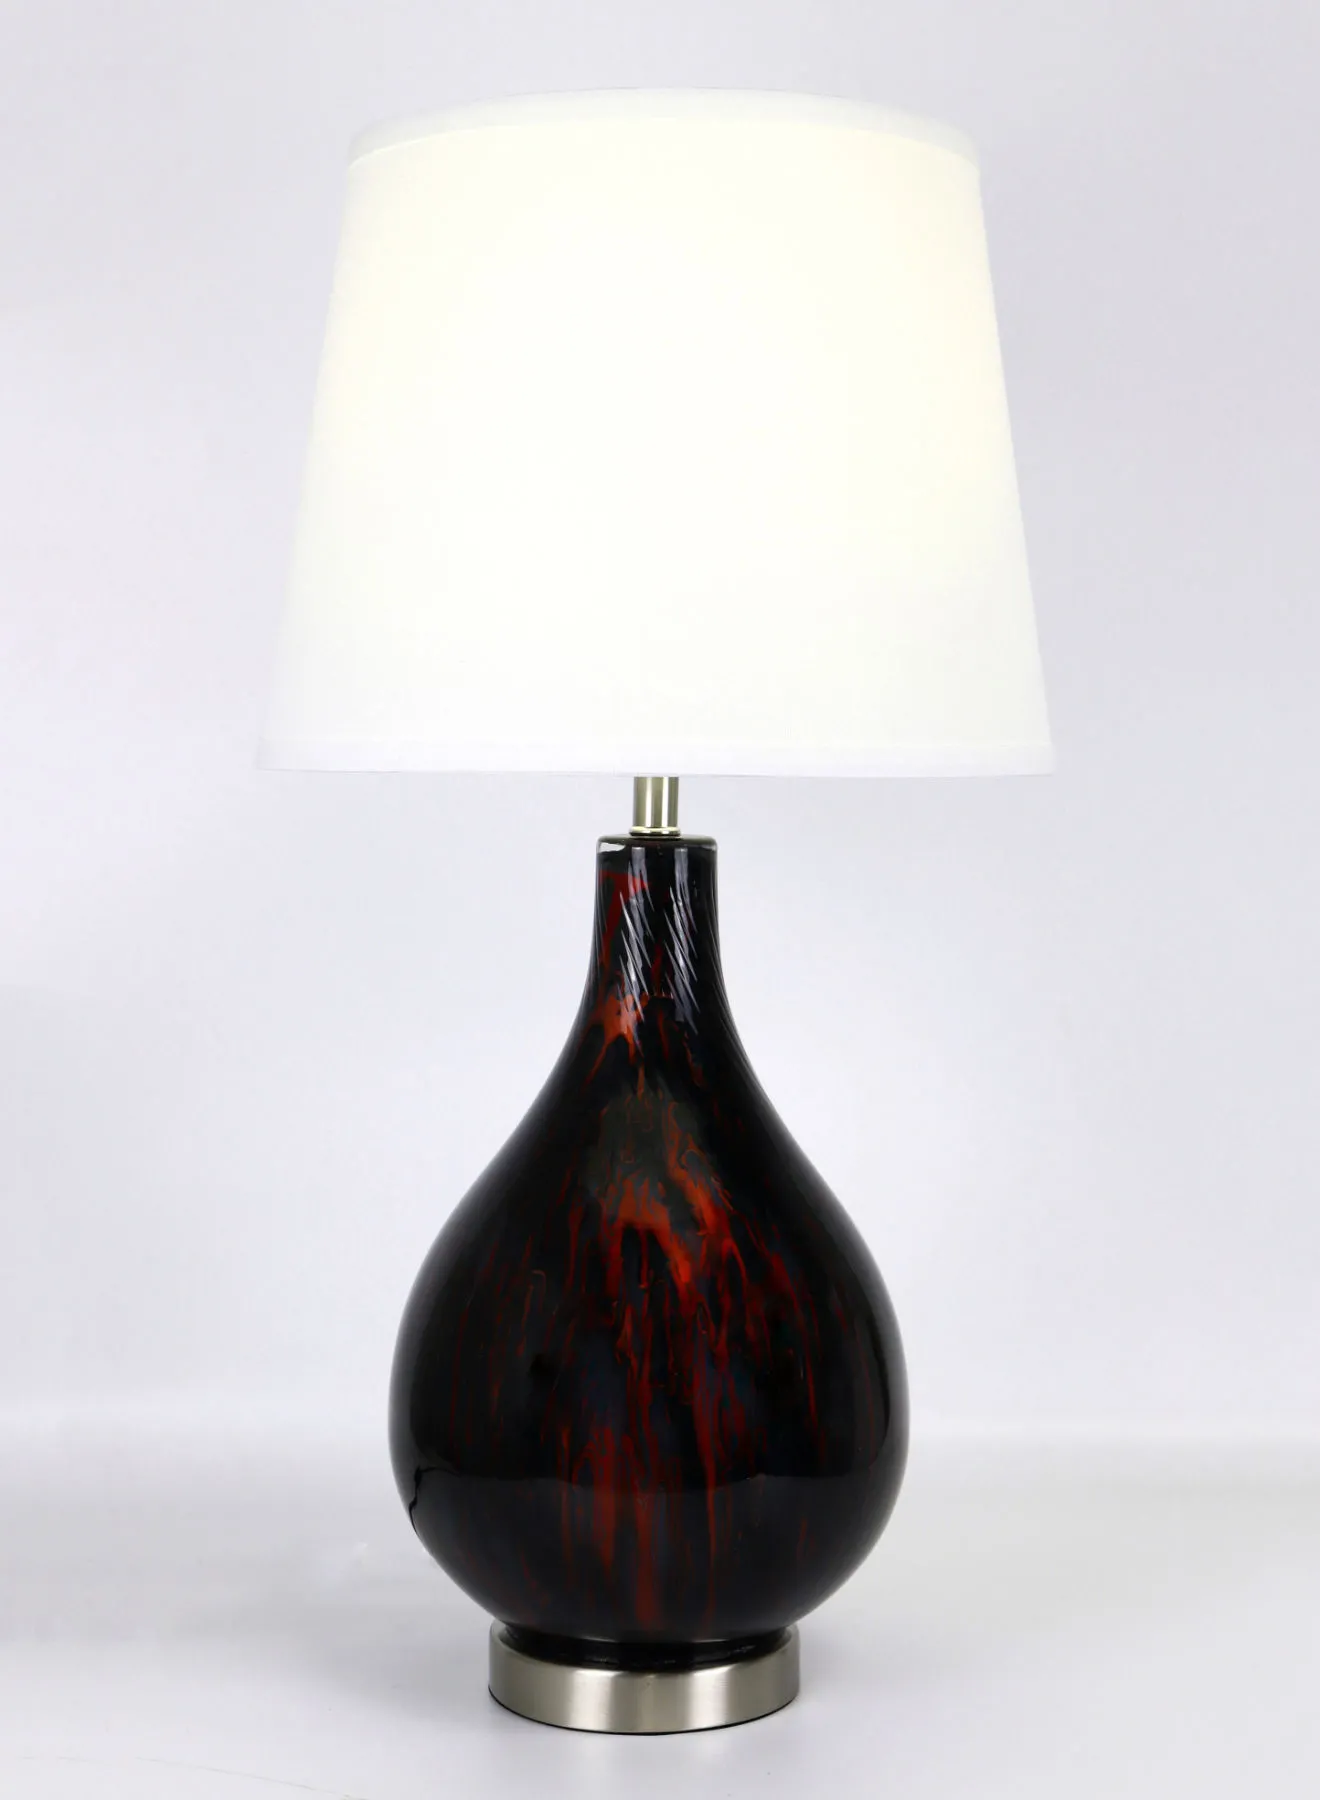 ebb & flow Modern Design Glass Table Lamp Unique Luxury Quality Material for the Perfect Stylish Home RSN71054-A Orange/Black 13 x 24.5